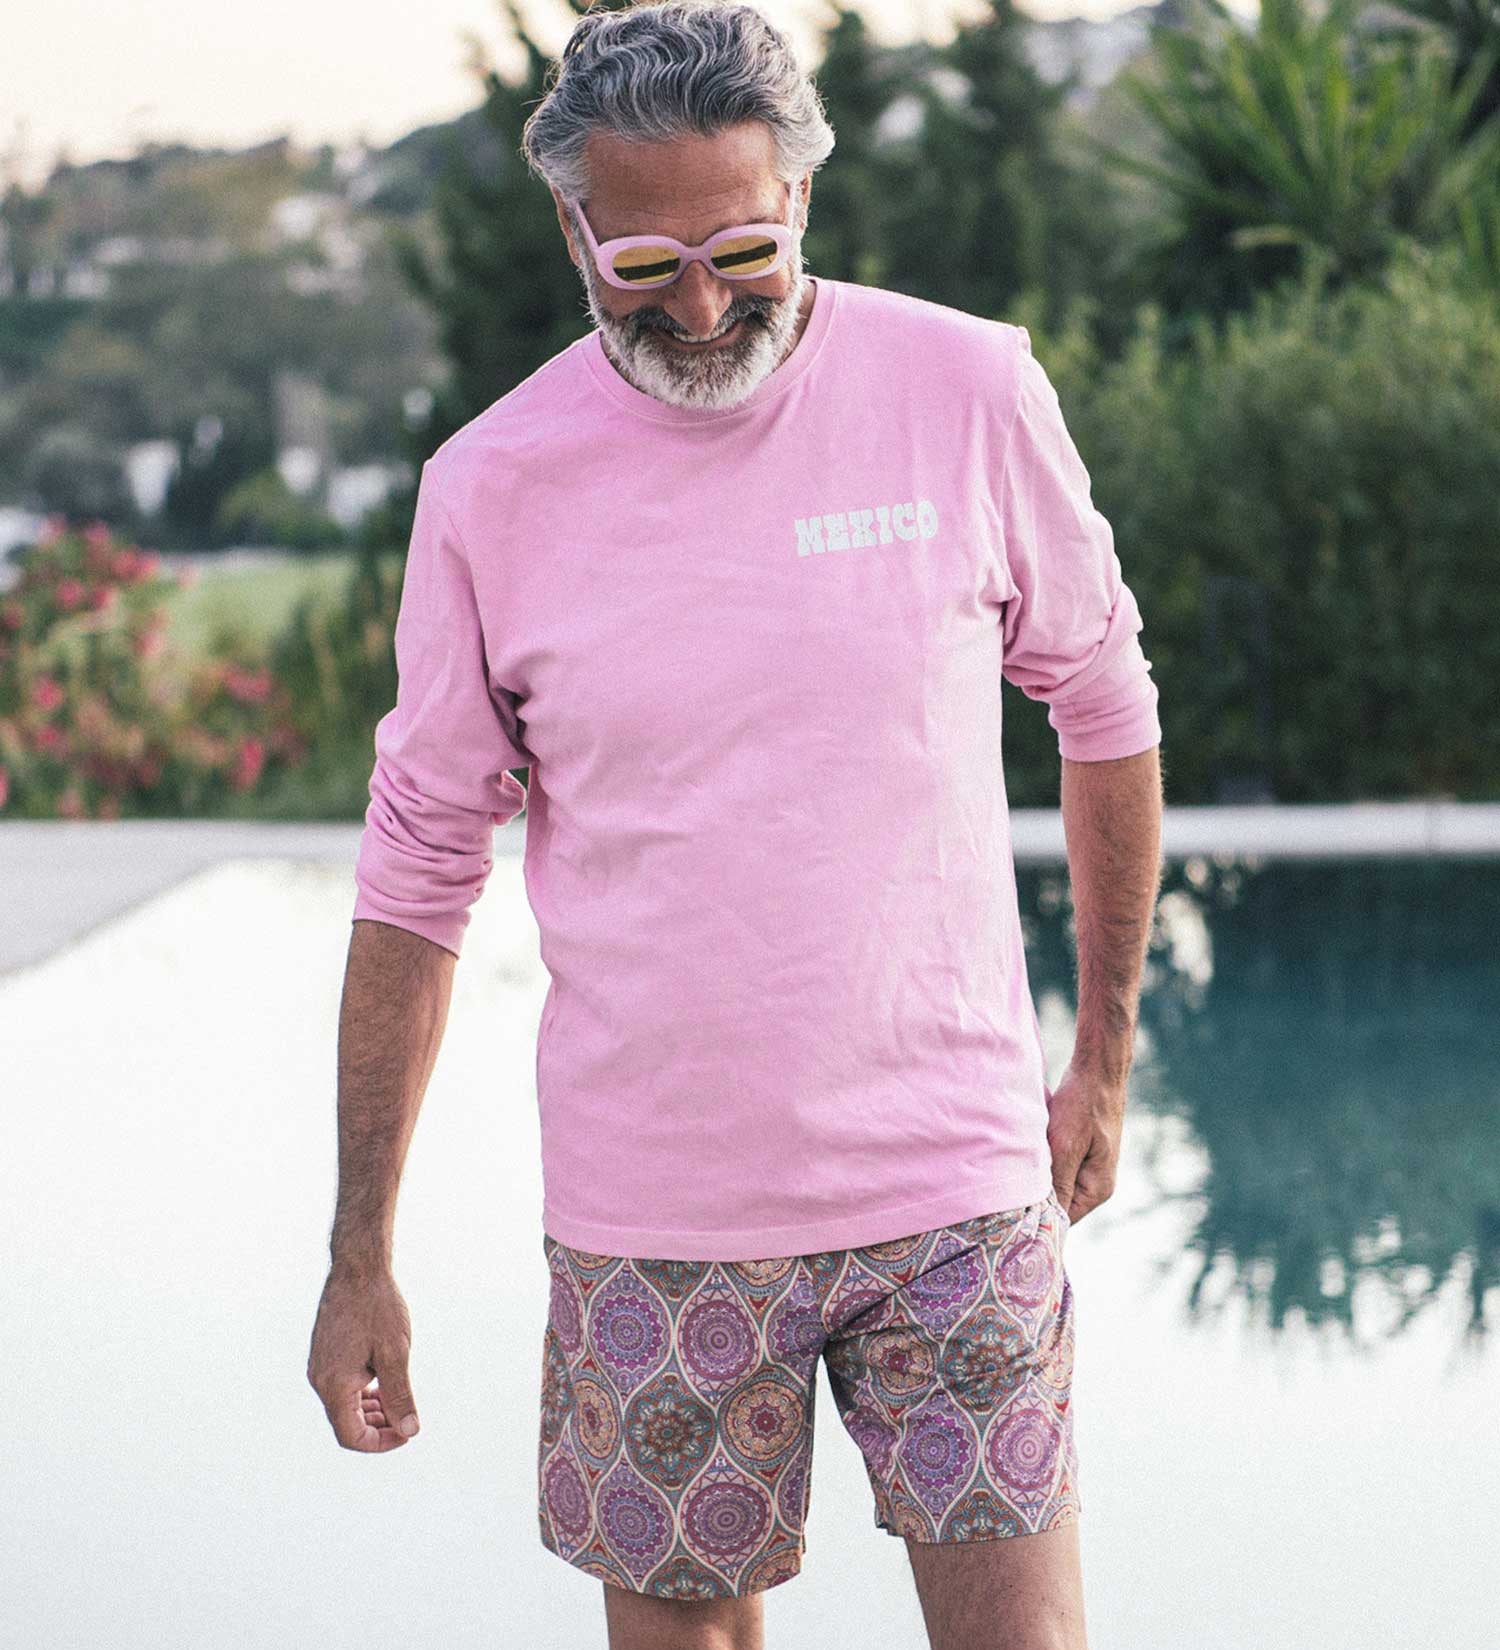 Man with pink shirt and multicolored swim trunks